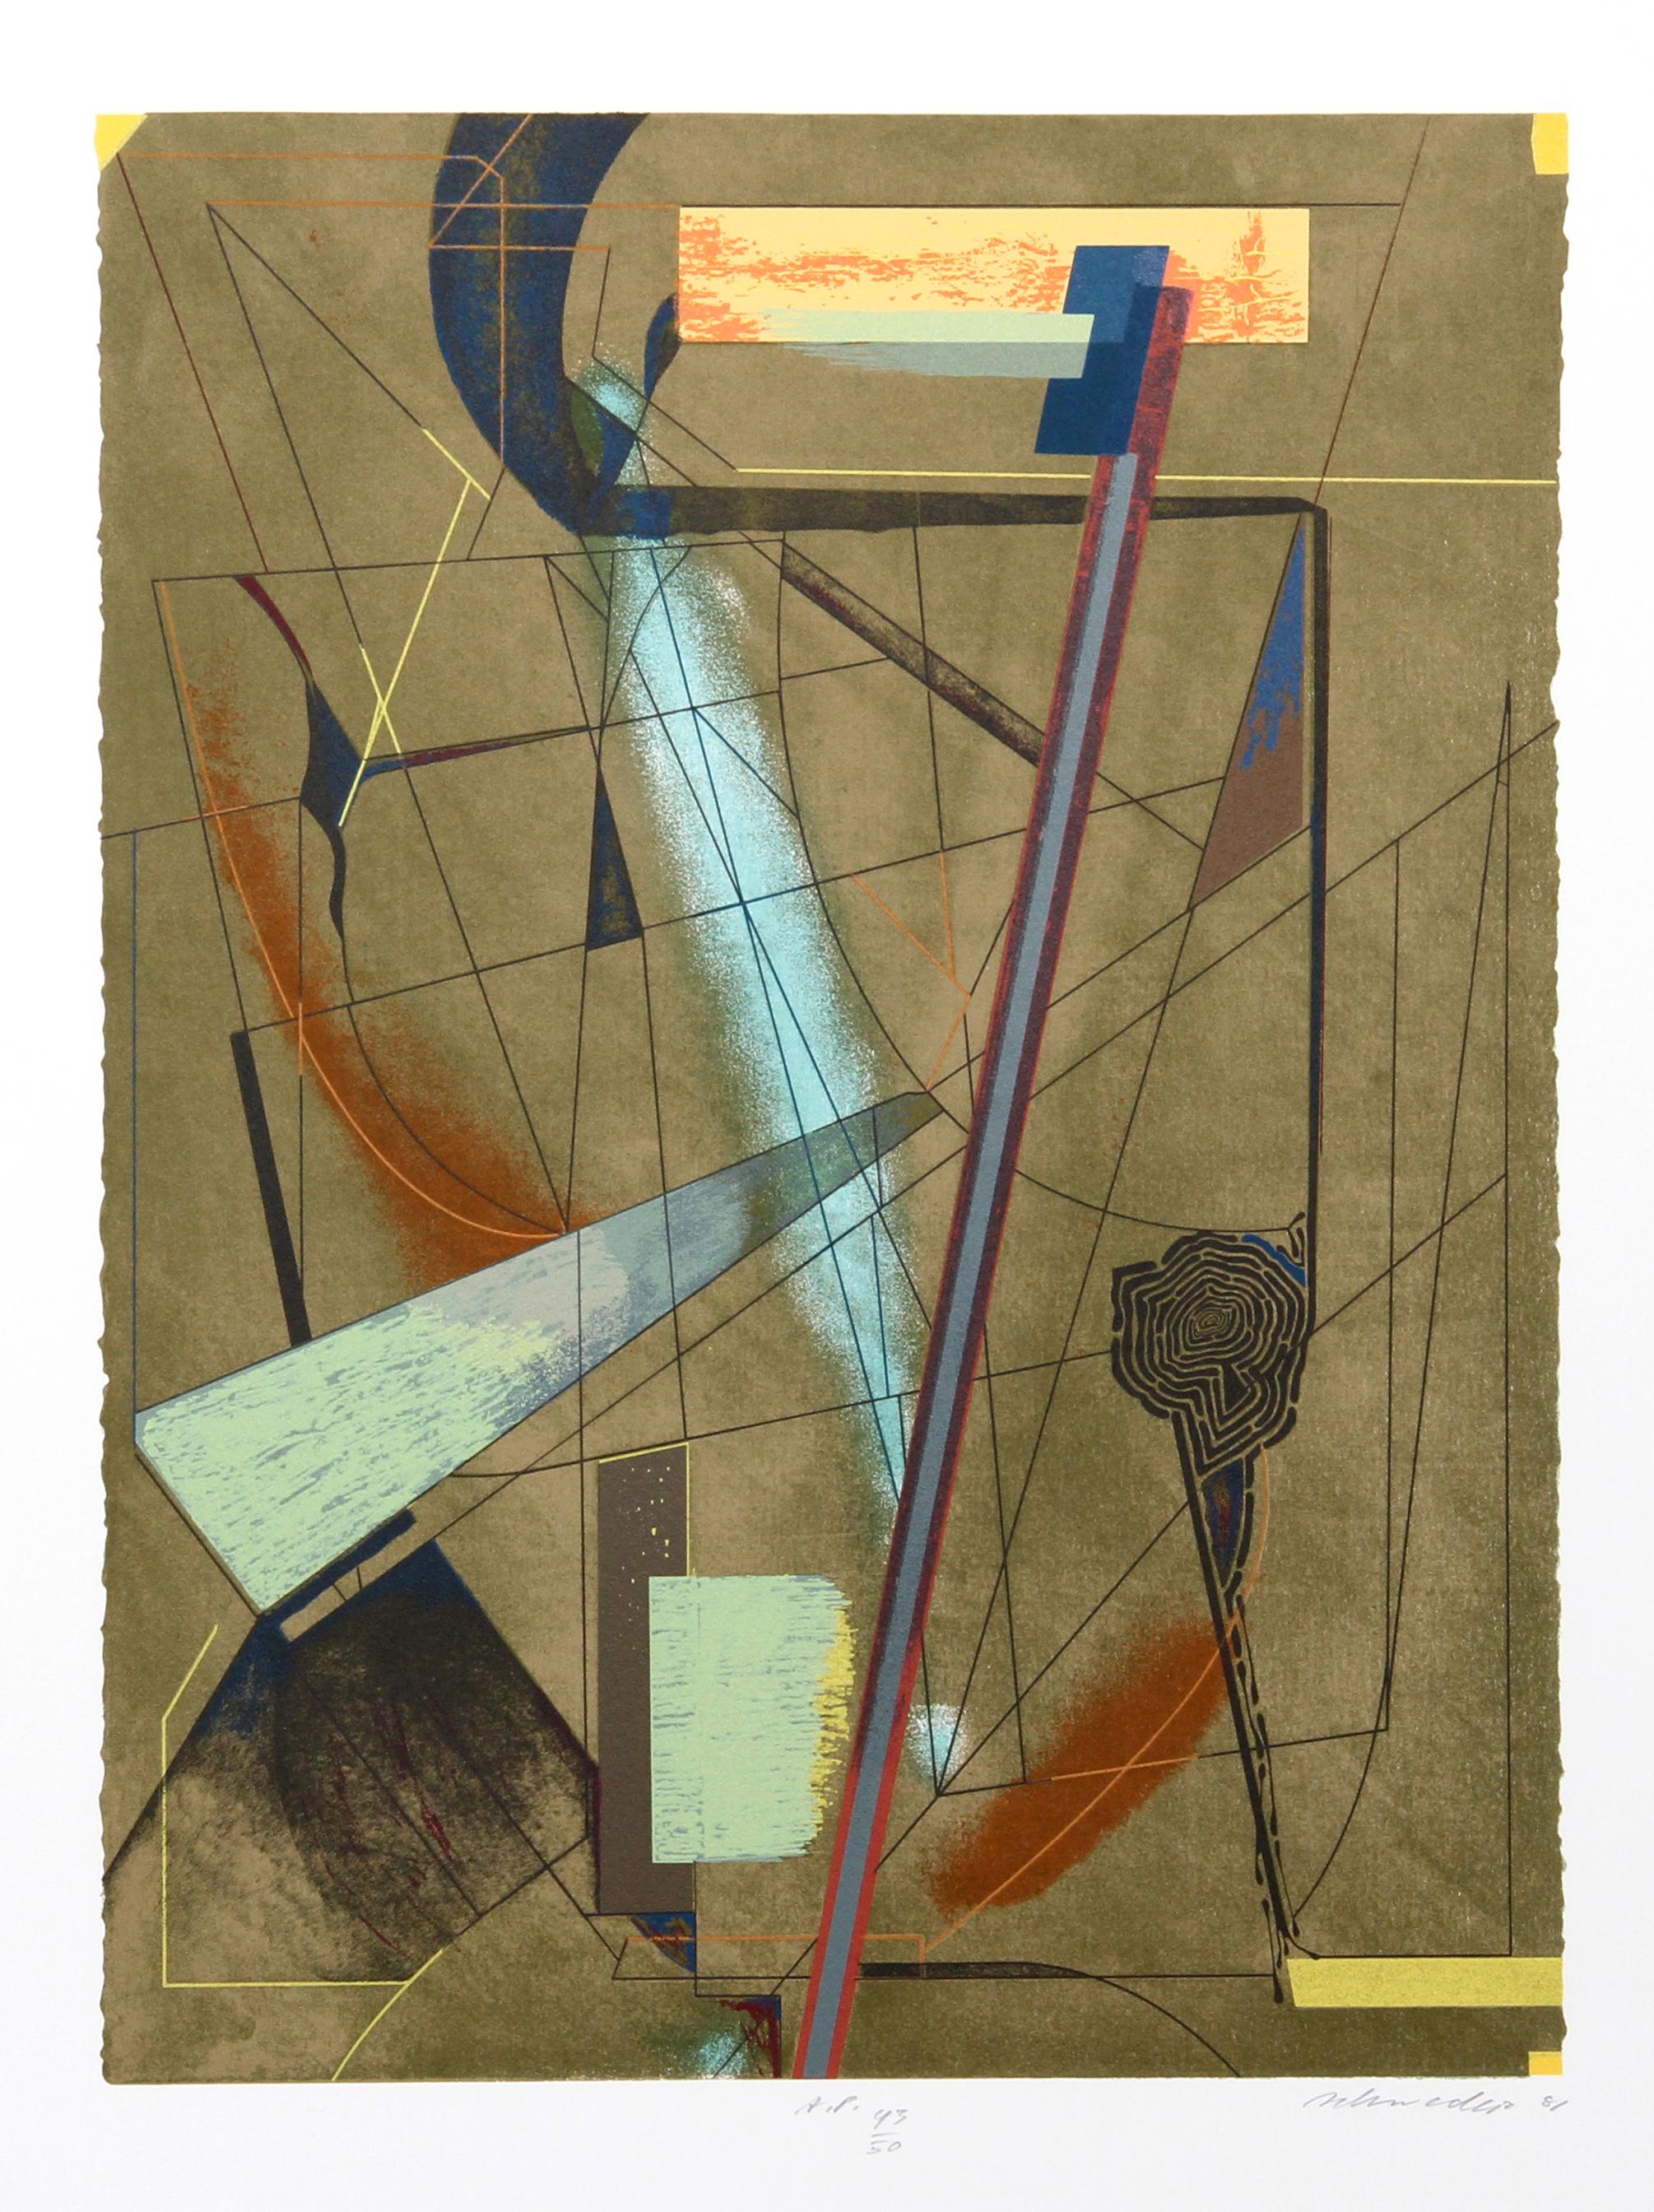 This angular print by William Schwedler is indicative of his geometric, abstract manner of composing forms and shapes in his compositions. 

Press Charges
Artist:  William Schwedler, American (1942 - 1982)
Date: 1979
Screenprint, signed and numbered